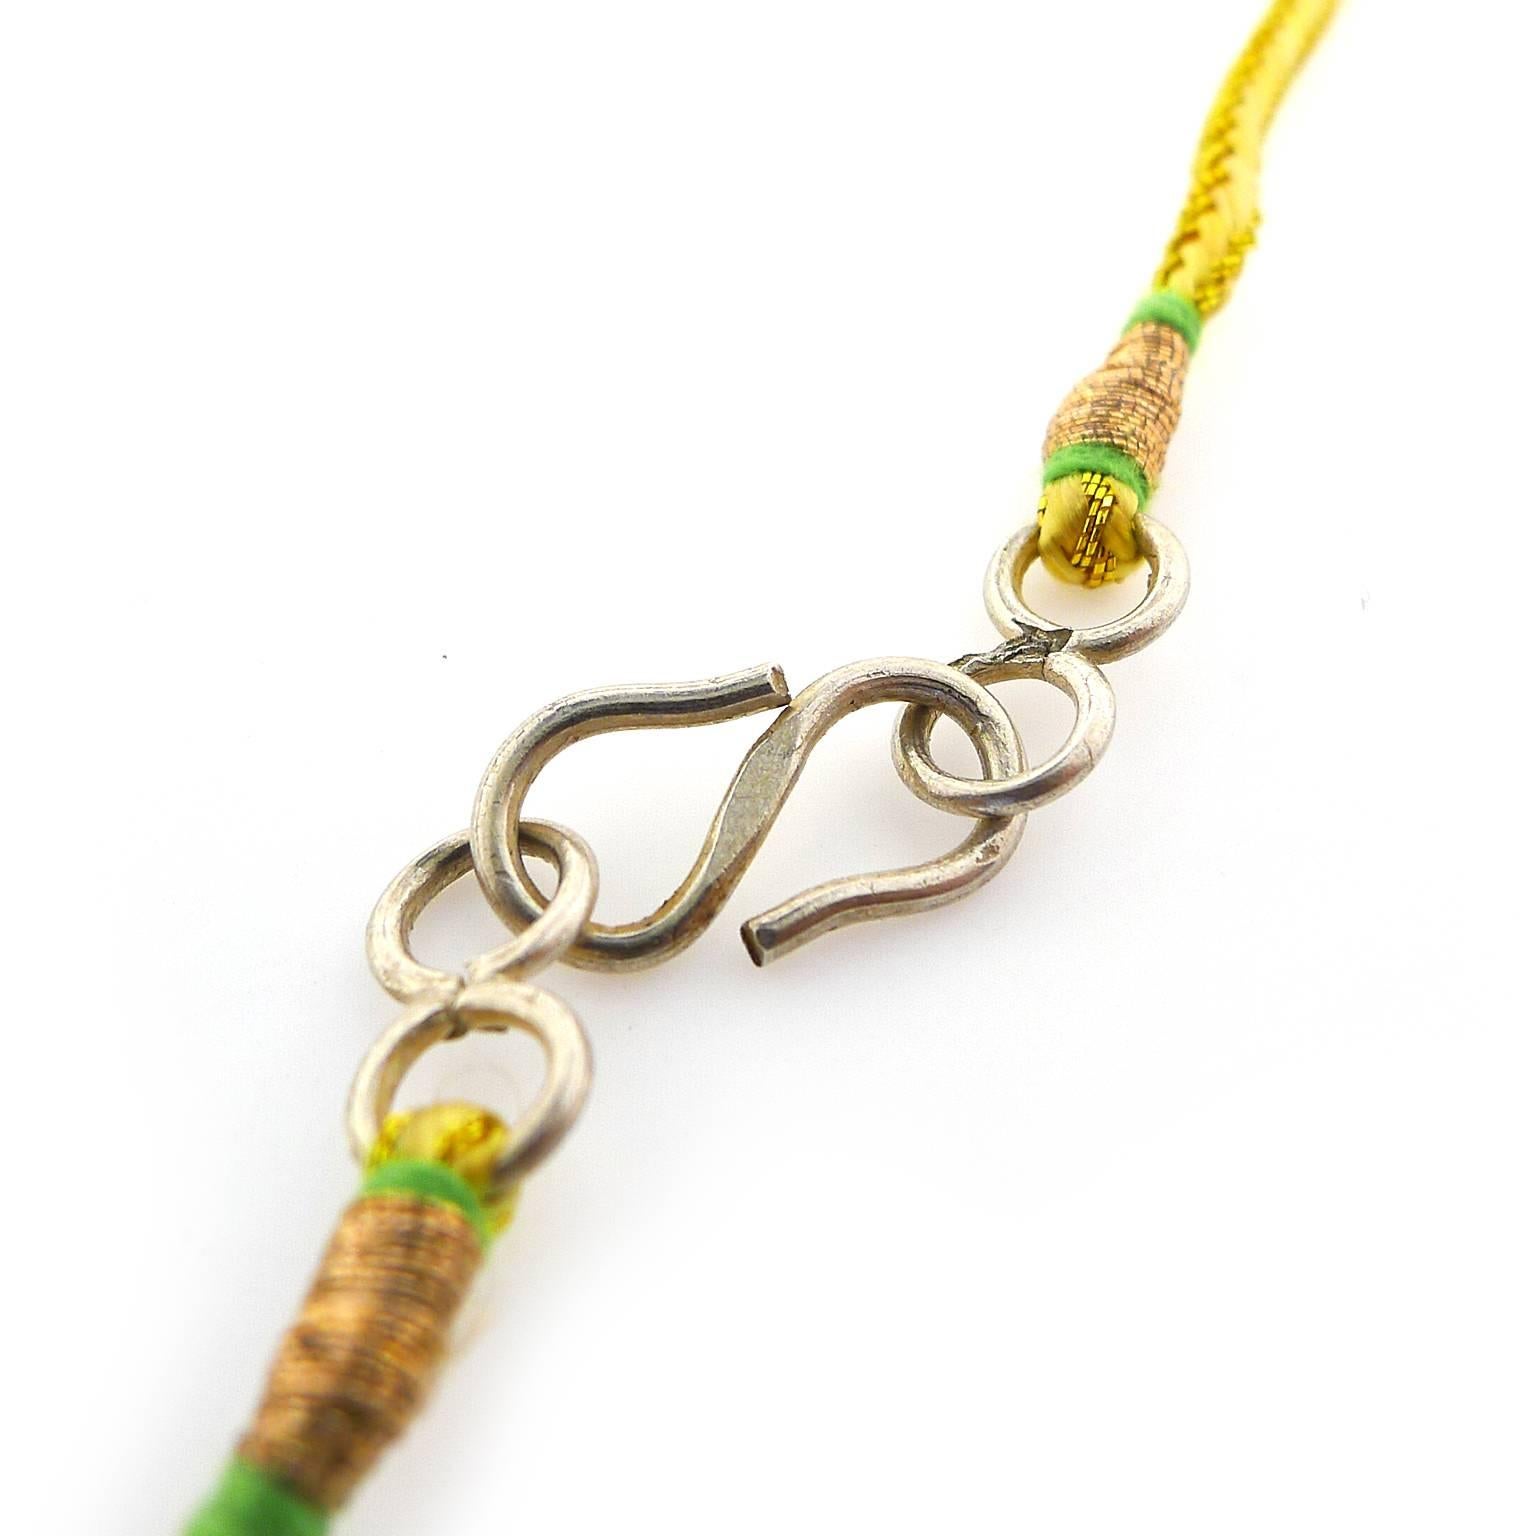 Necklace measures 18 inches with a silver colored clasp strung onto gold colored cording. 19 peridot briolettes can be worn as is or redesigned into an amazing piece of jewelry with your local jeweler.